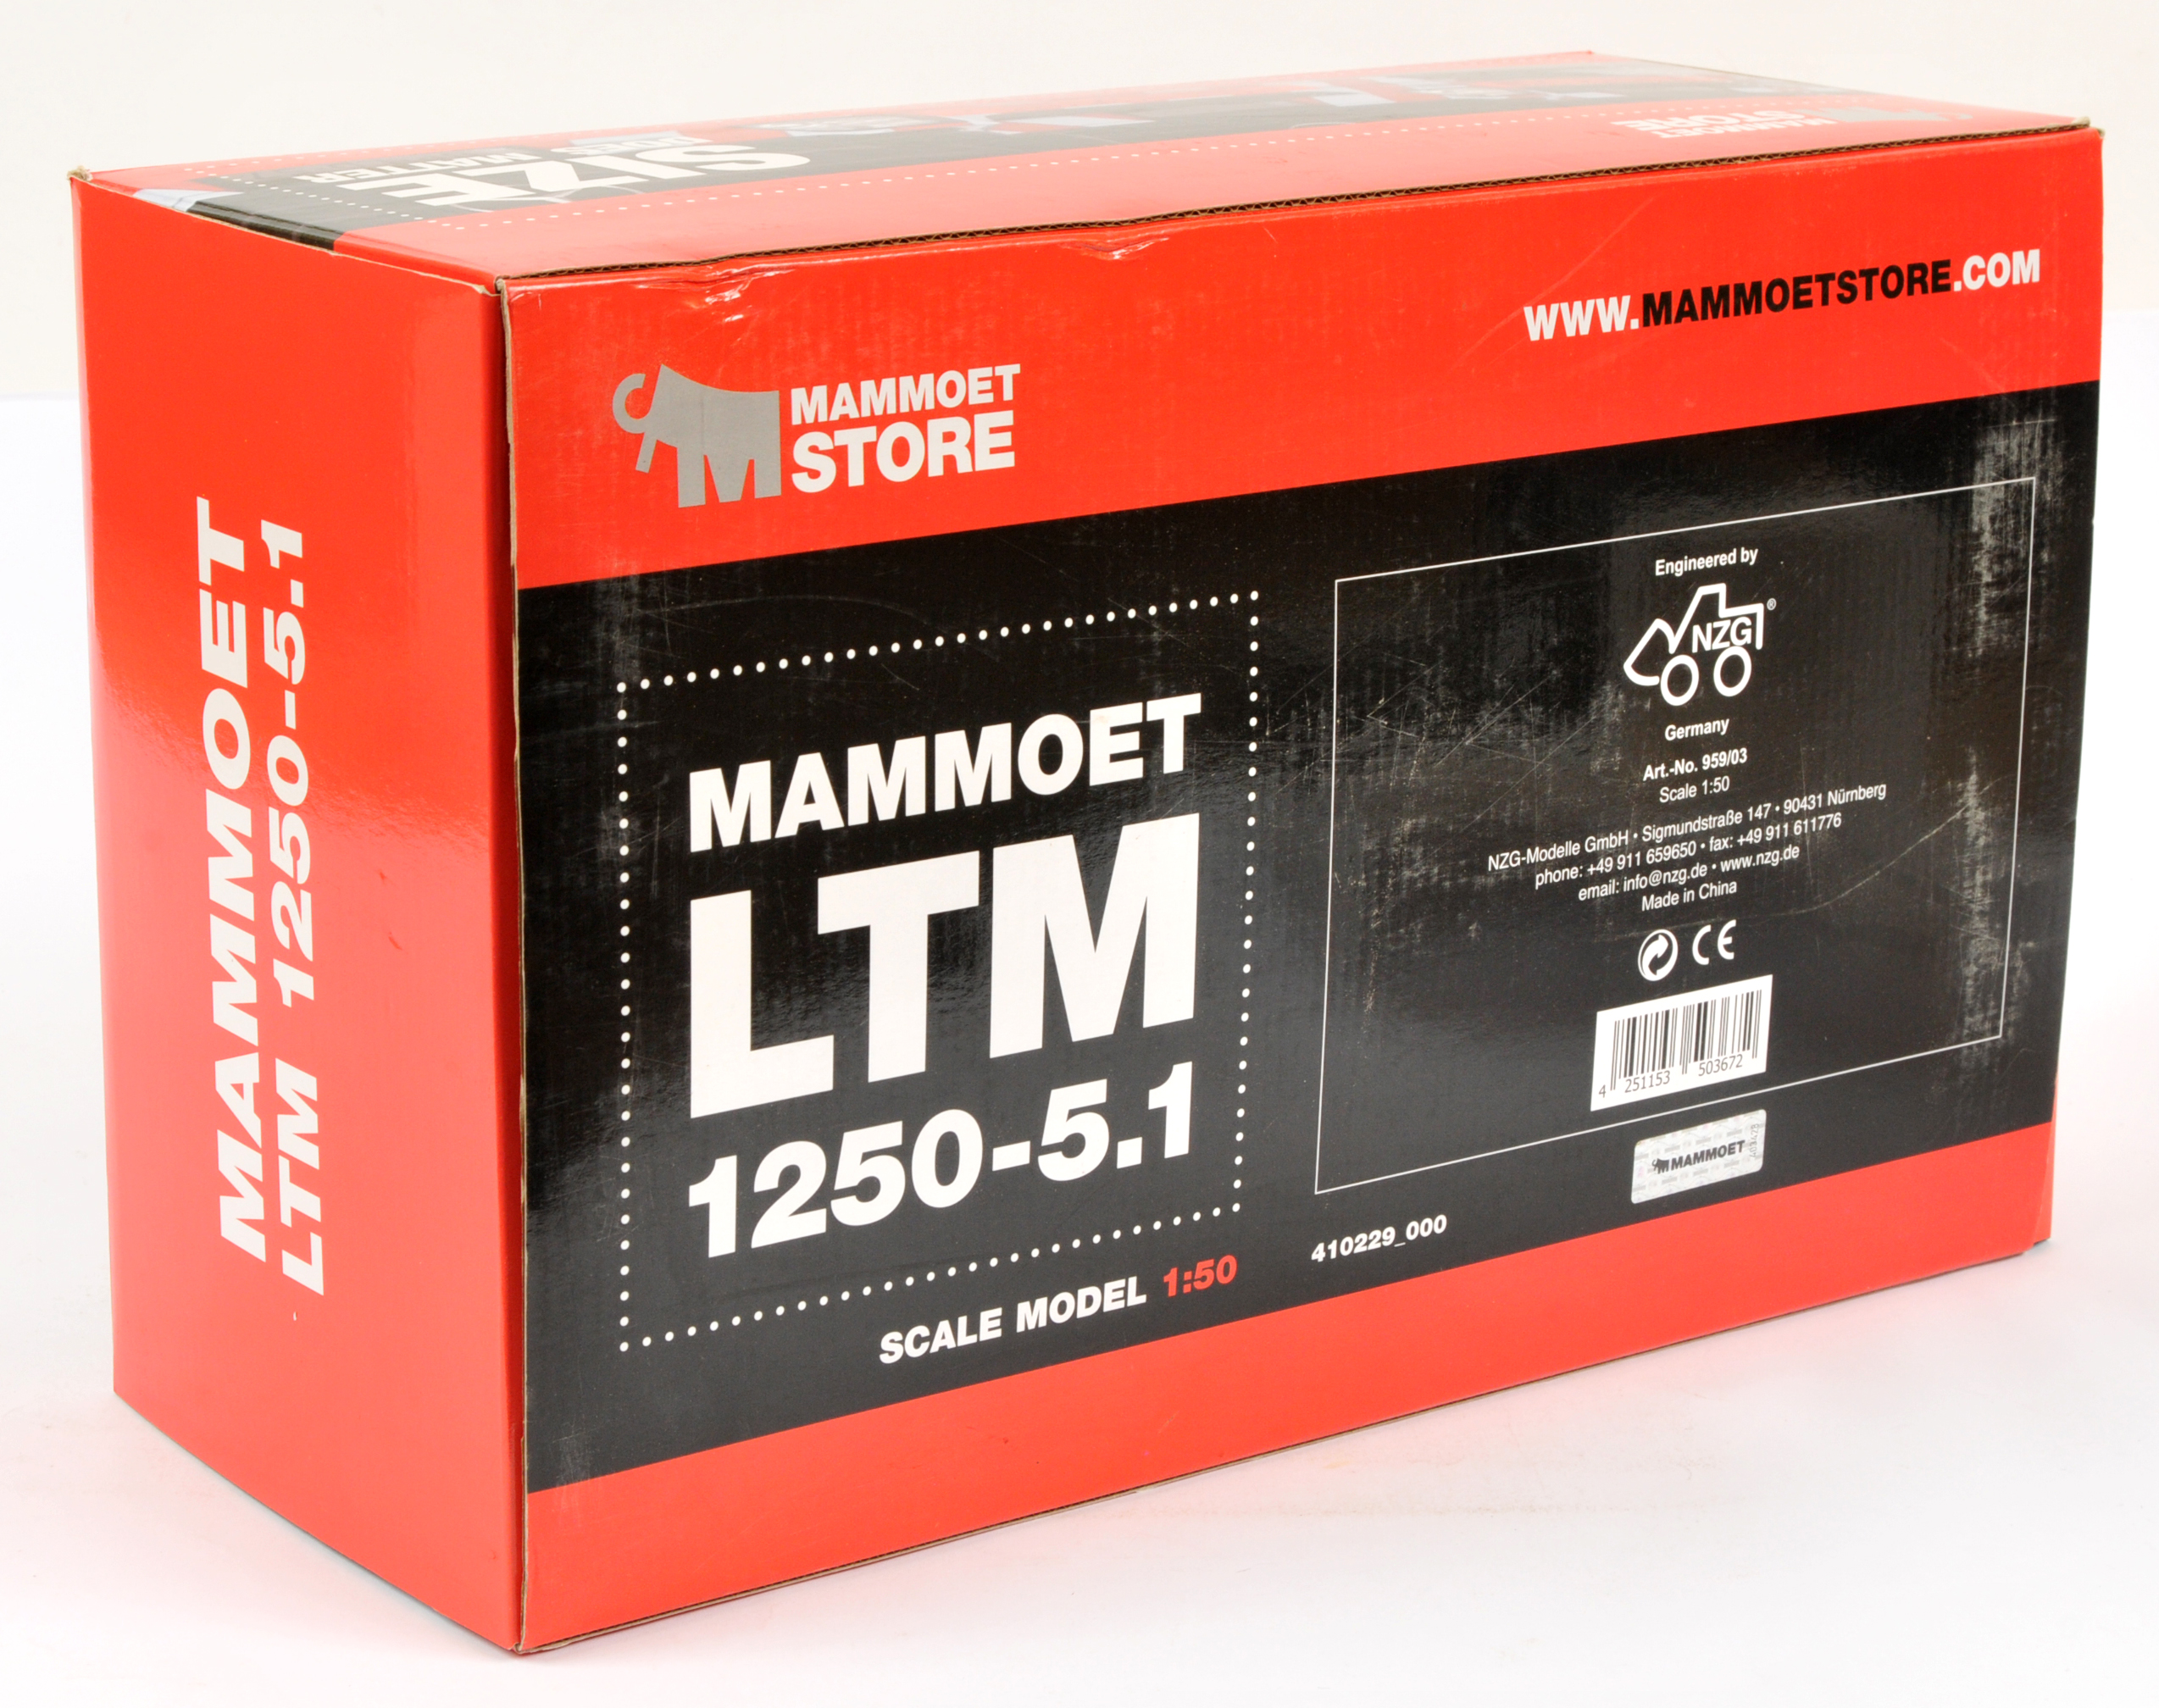 NZG  (1/50th) "Mammoet" LTM 1250-5.1 Mobile Crane - Red and Black -  Near Mint in  Good Plus card... - Image 2 of 3